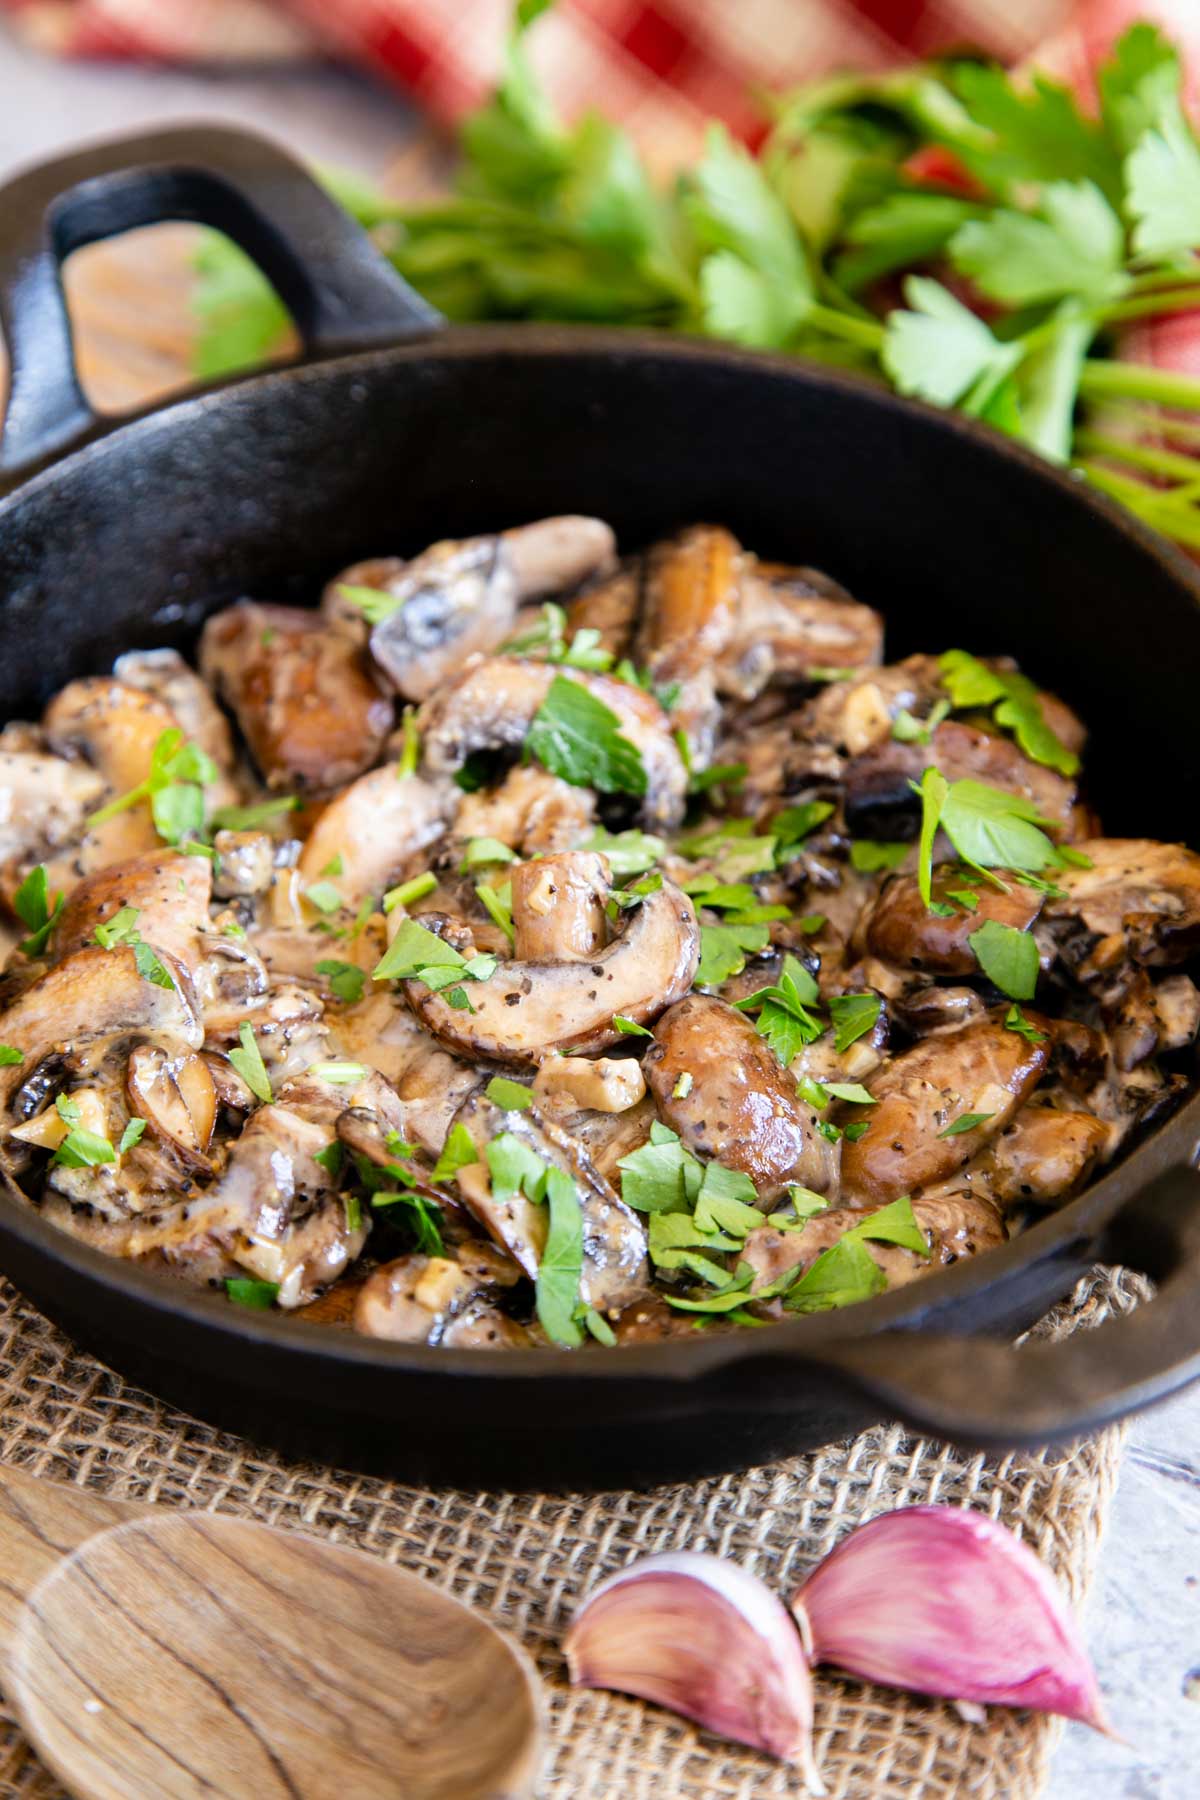 Gorgeous garlic mushrooms with cream, served in a heavy serving dish for a rustic look.